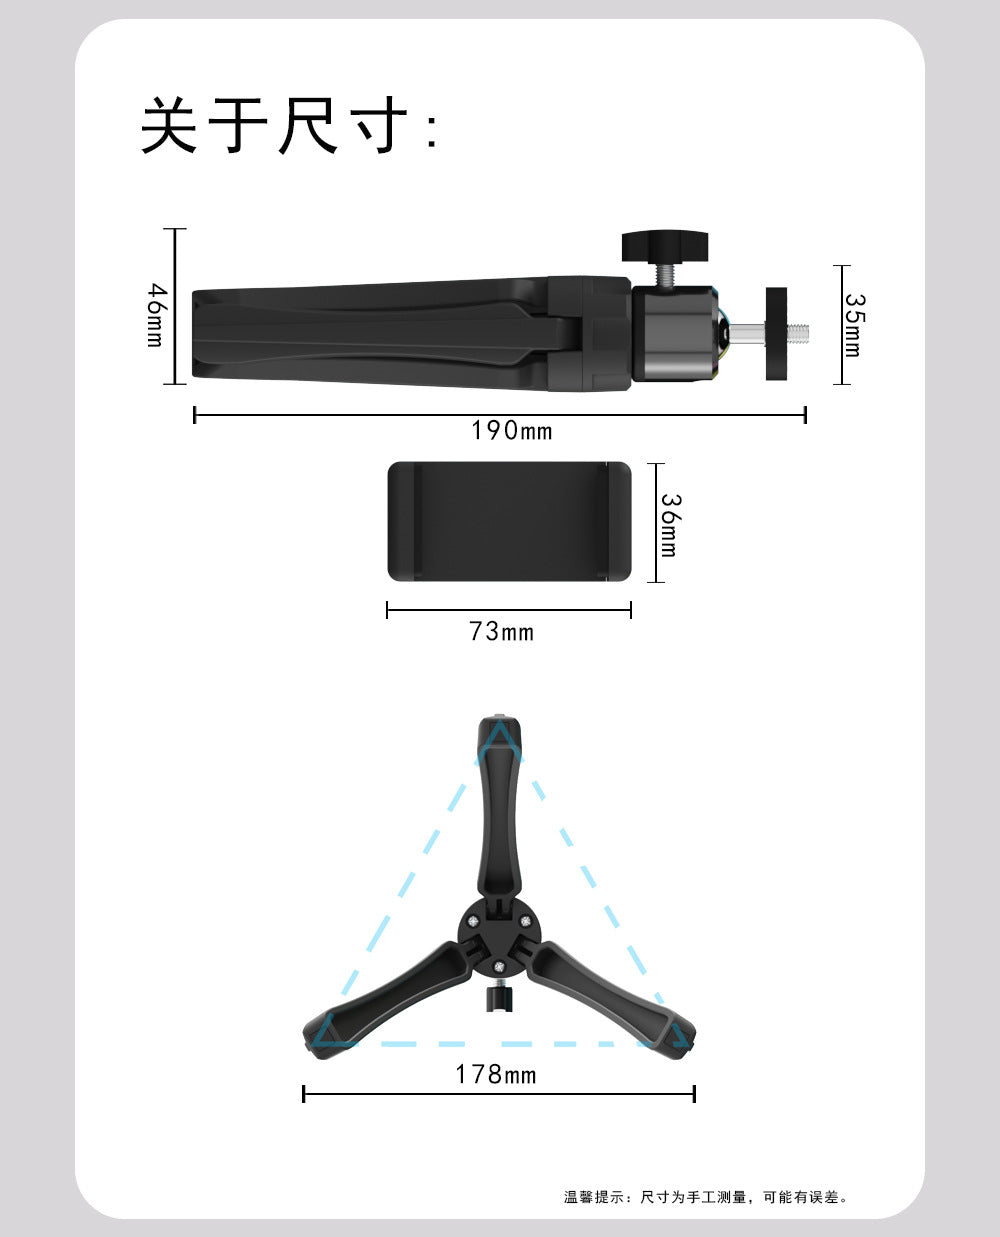 Desktop stand, tripod stand, projector stand, projector folding stand, camera stand, mini stand （UPC 699978702308）